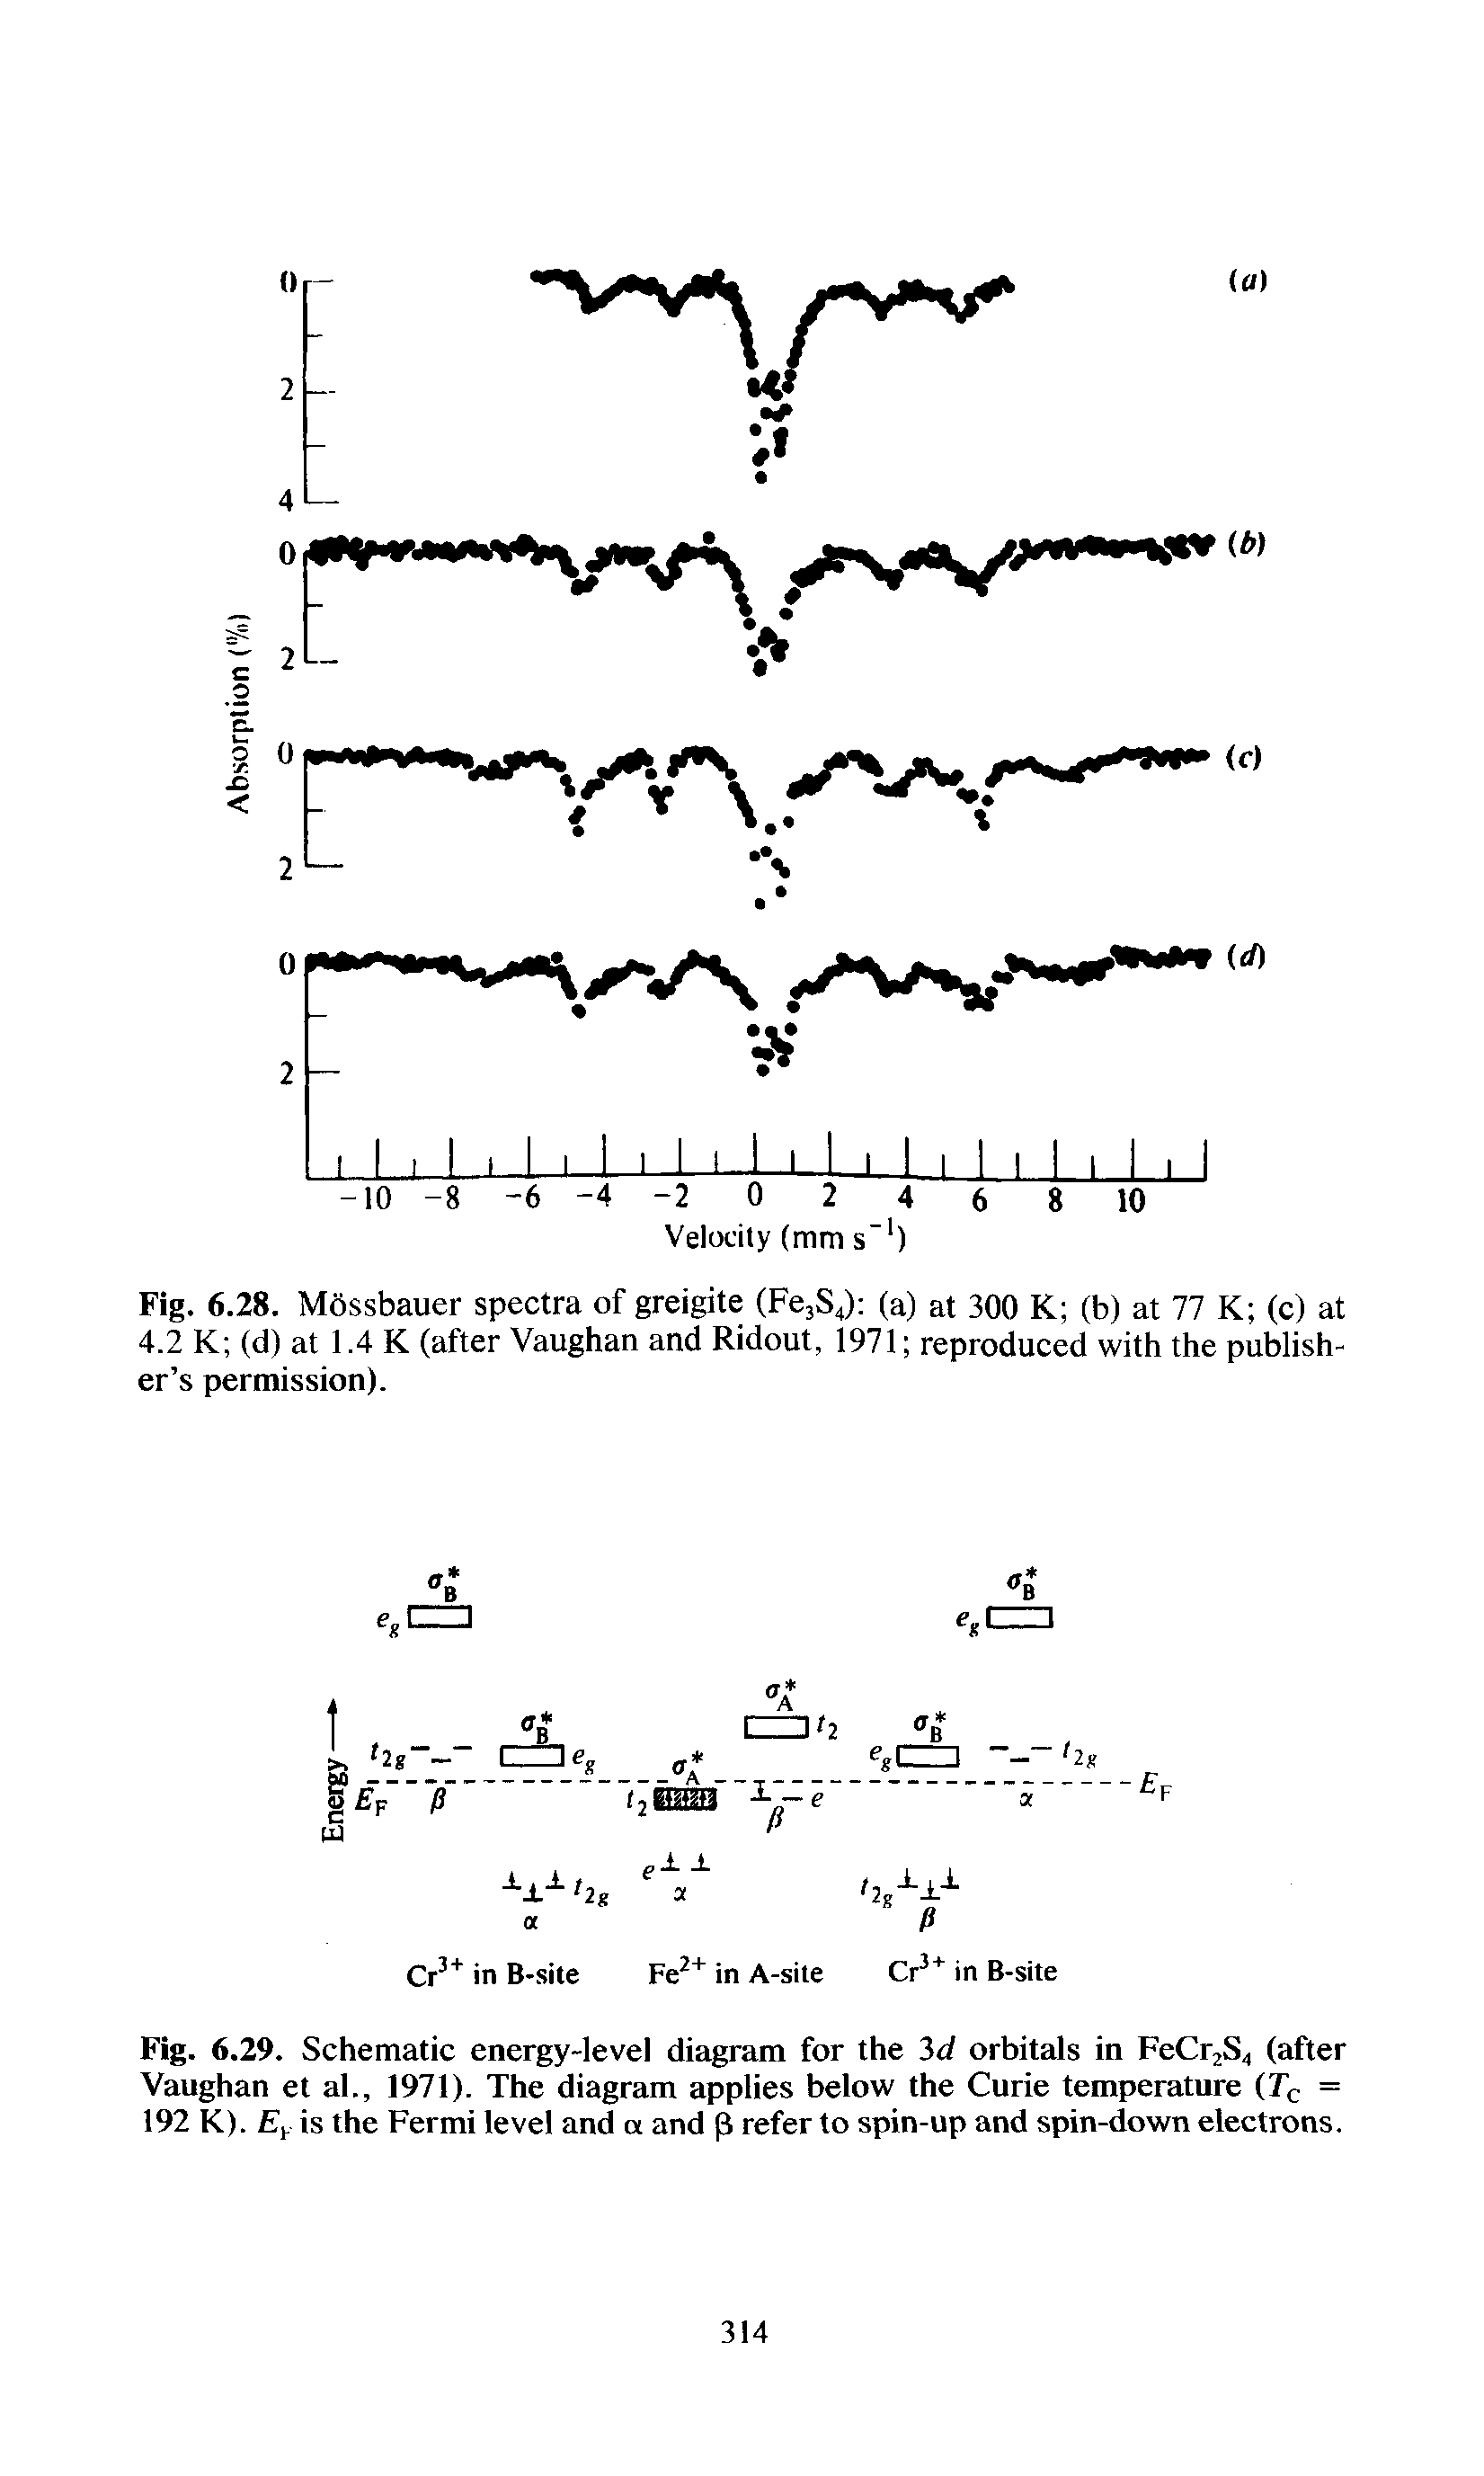 Fig. 6.29. Schematic energy-level diagram for the 3d orbitals in FeCr2S4 (after Vaughan et al., 1971). The diagram applies below the Curie temperature (Tc = 192 K). Ey is the Fermi level and a and p refer to spin-up and spin-down electrons.